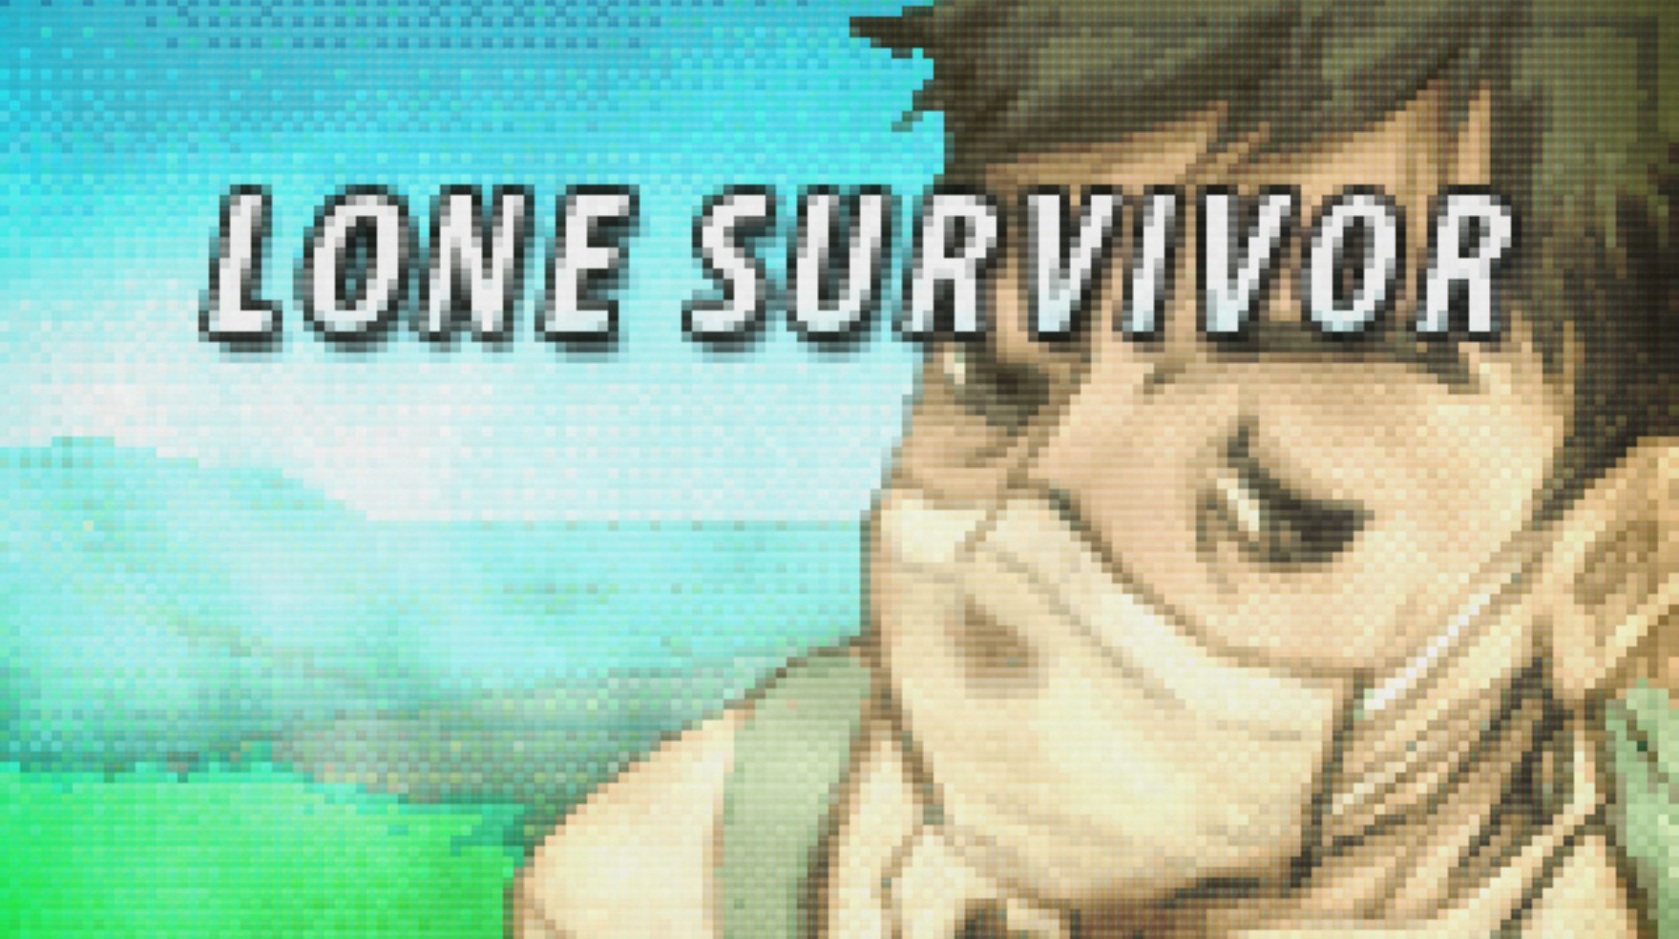 Living at the End of the World: Lone Survivor